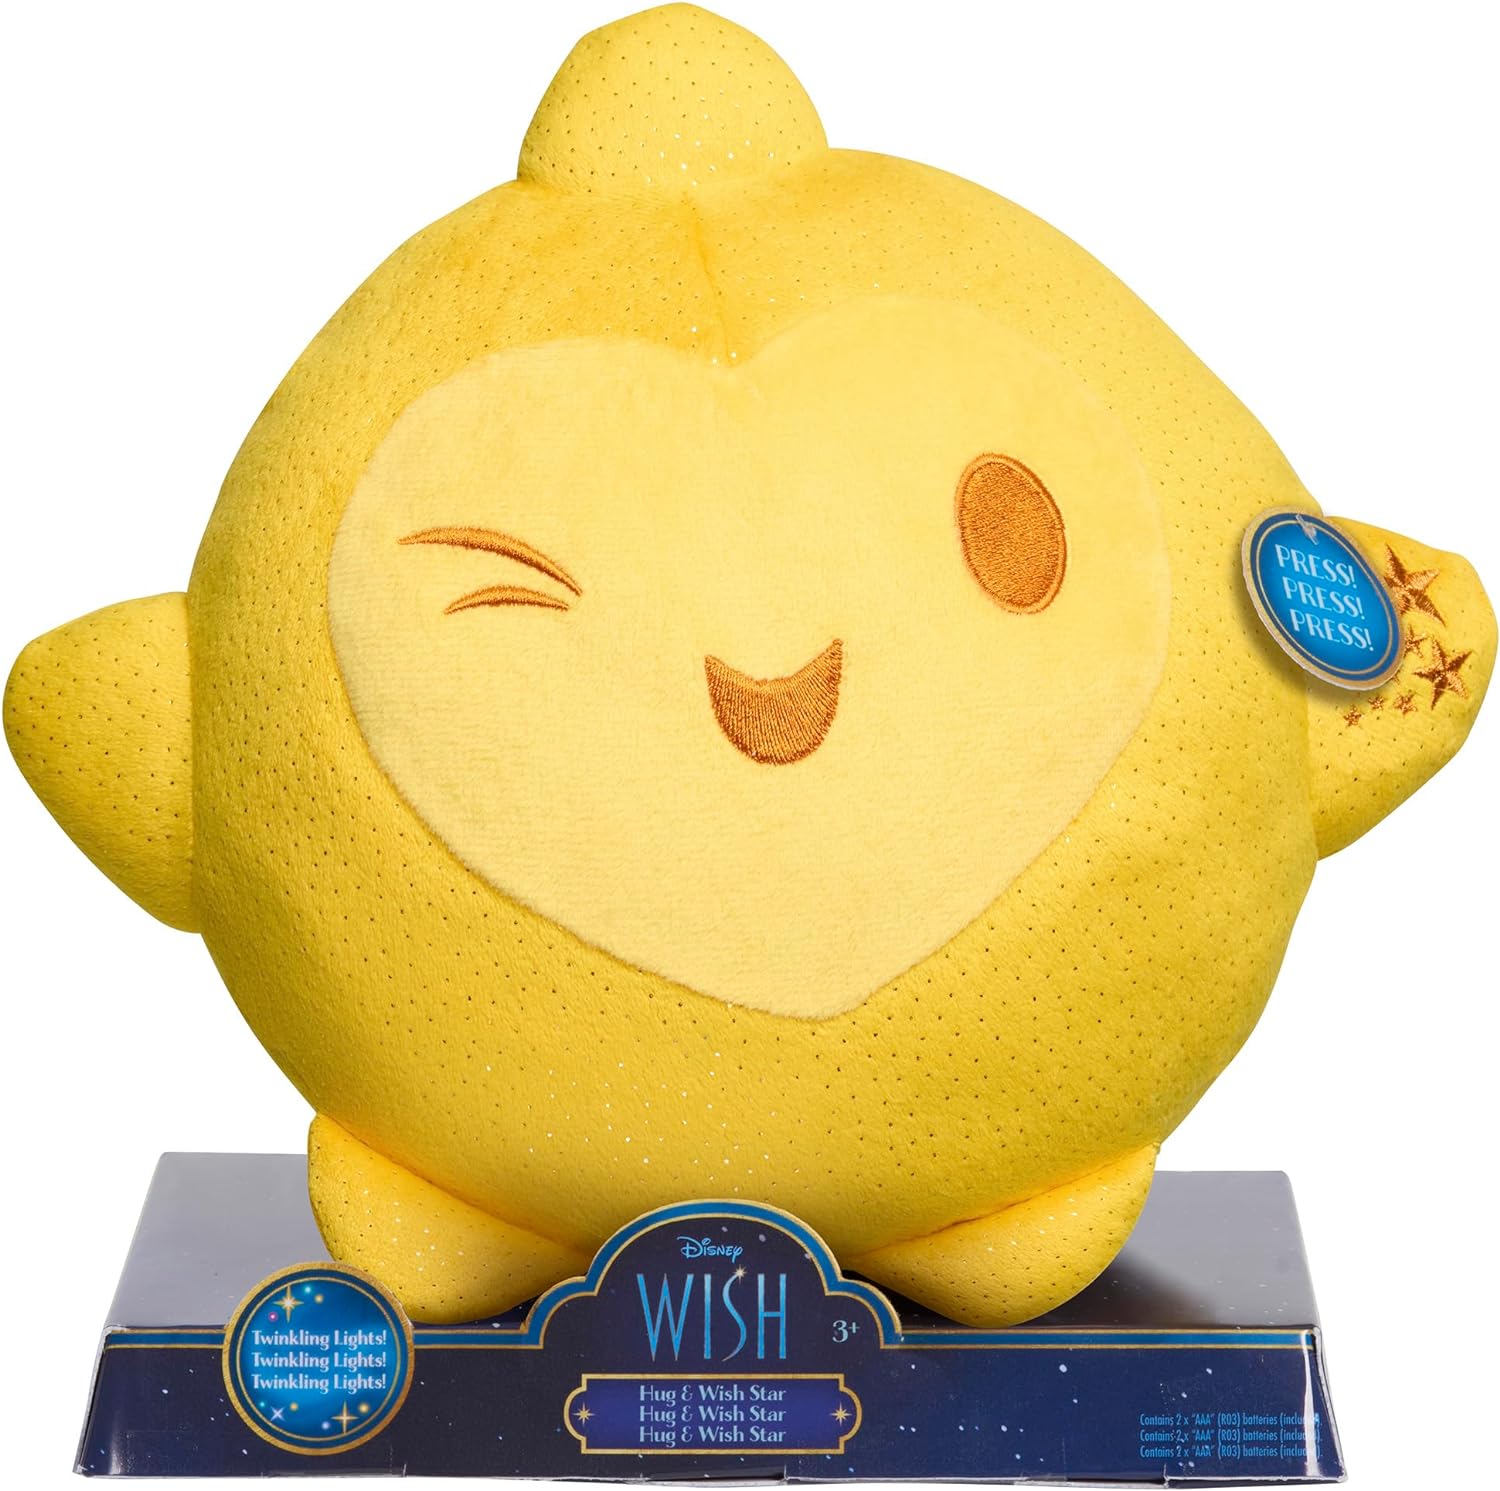 Disney Wish Hug & Wish Star 10-Inch Glowing Plush Star, Soothing Night Light, Officially Licensed Kids Toys for Ages 3 Up by Just Play